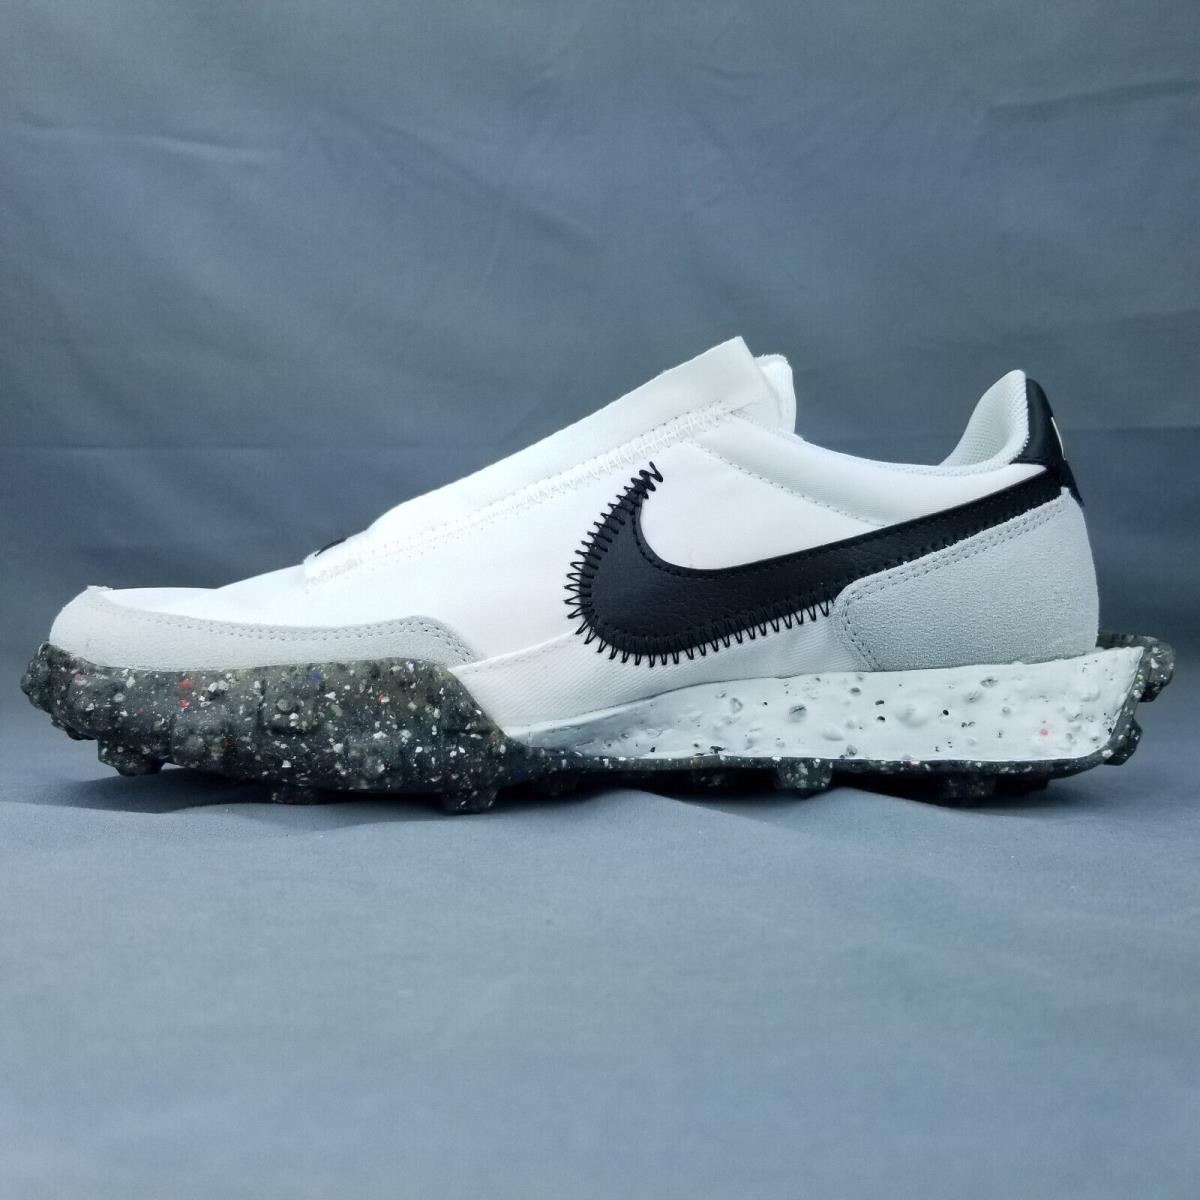 Nike Waffle Racer Crater Women`s Running Shoes CT1983 104 White Sizes 7-9